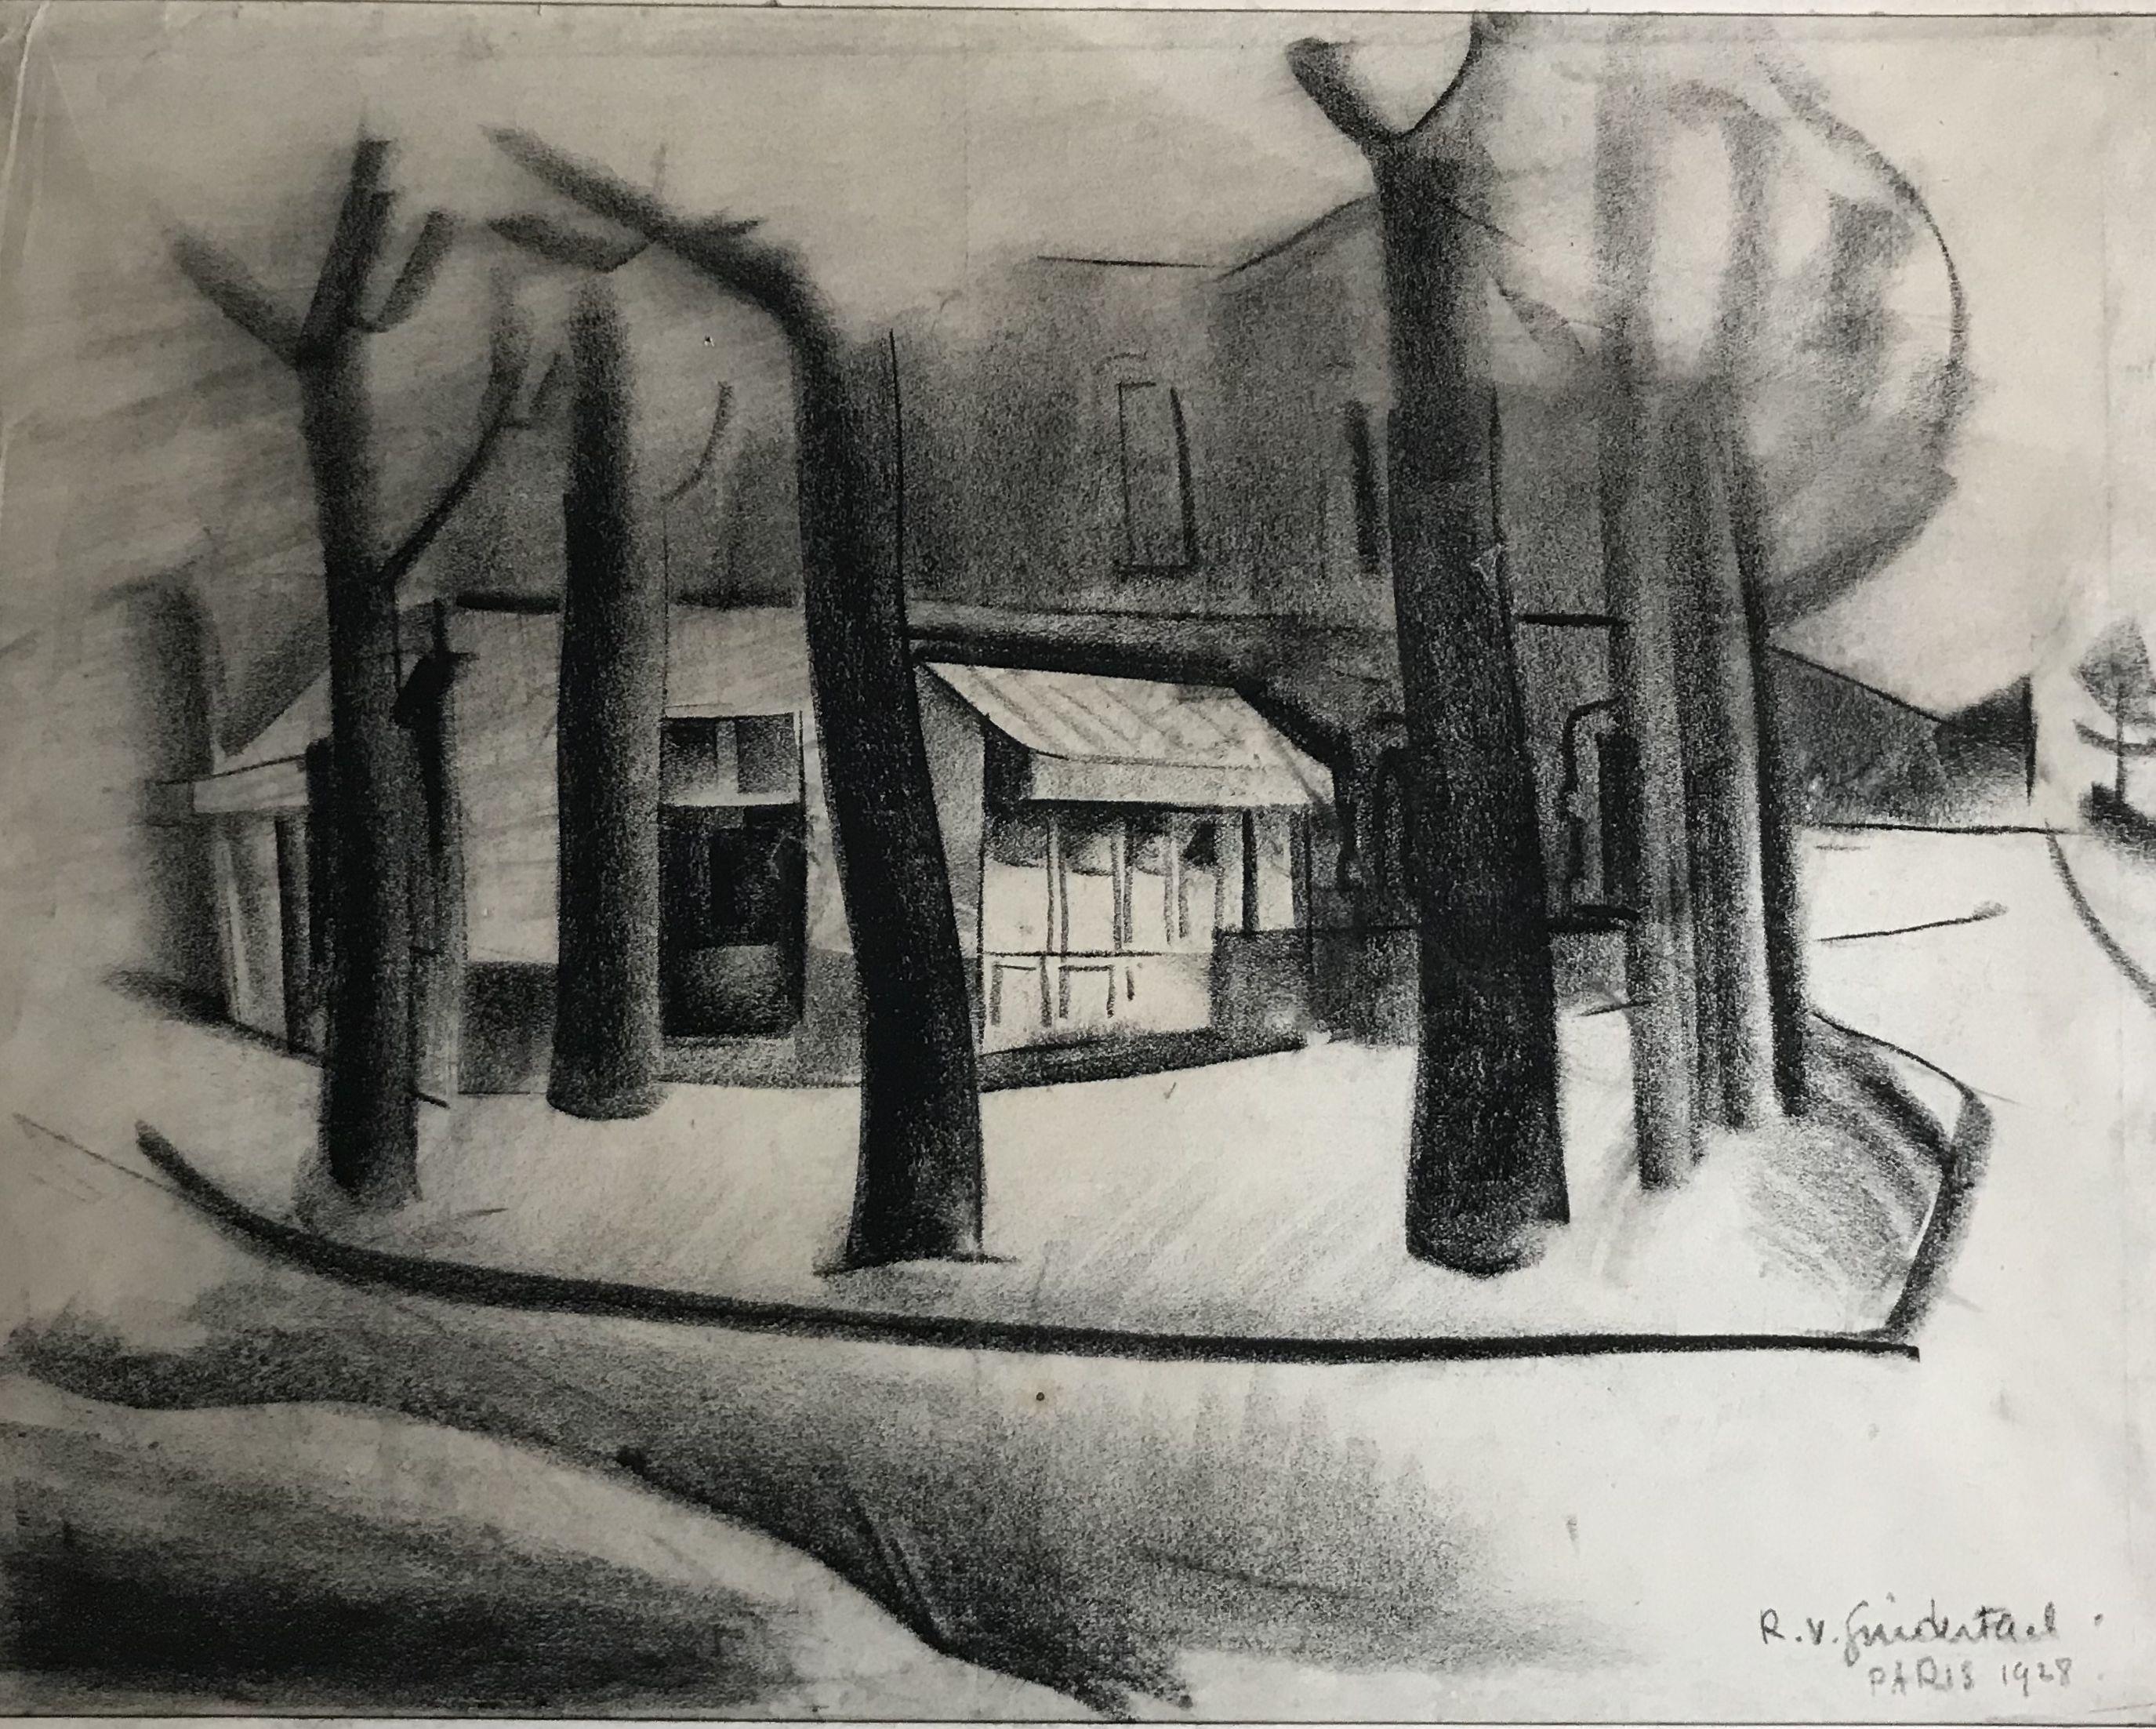 Roger VAN GINDERTAEL. Paris street view. Charcoal drawing. Signed / dated 1928.